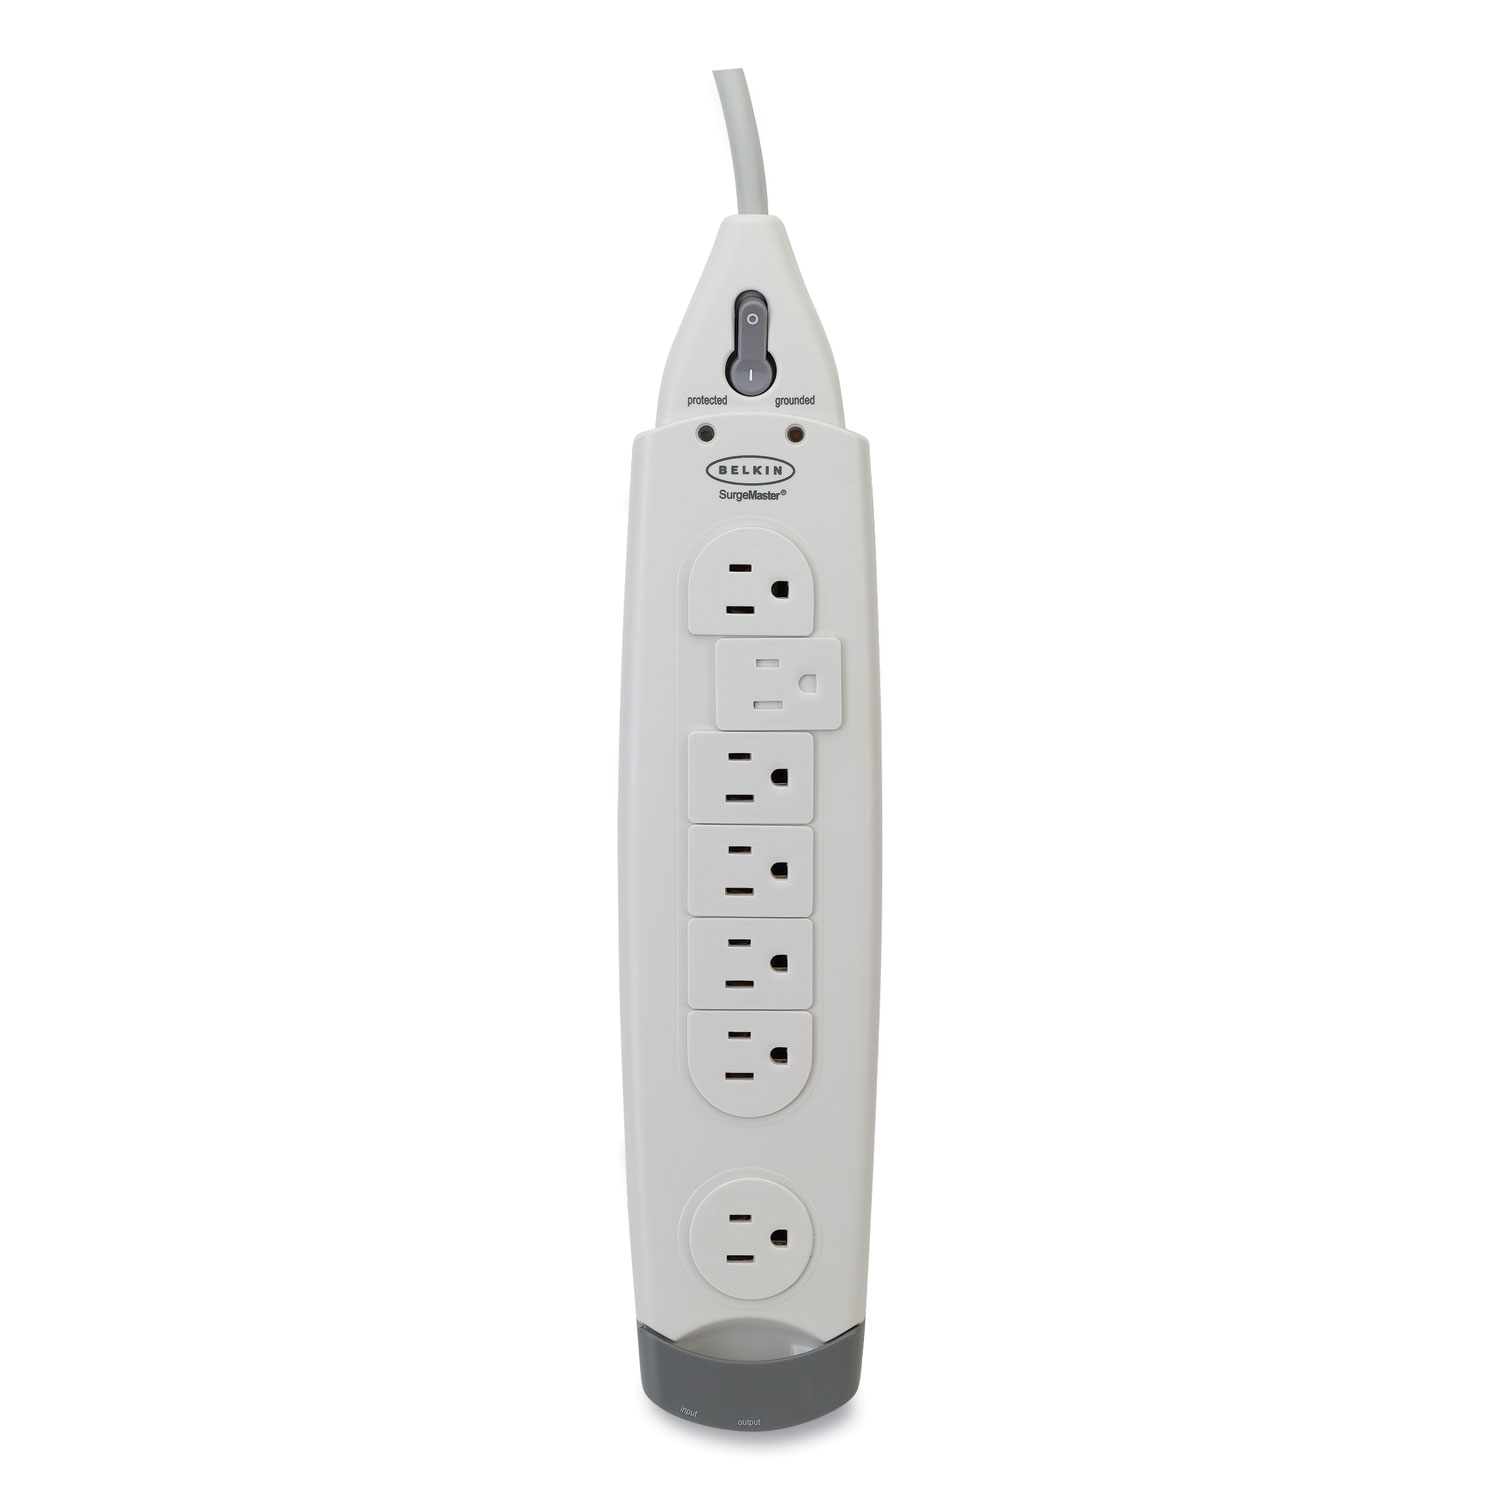  Belkin F9H710-06 SurgeMaster Home Series Surge Protector, 7 Outlets, 6 ft Cord, 1045 J, White (BLKF9H71006) 